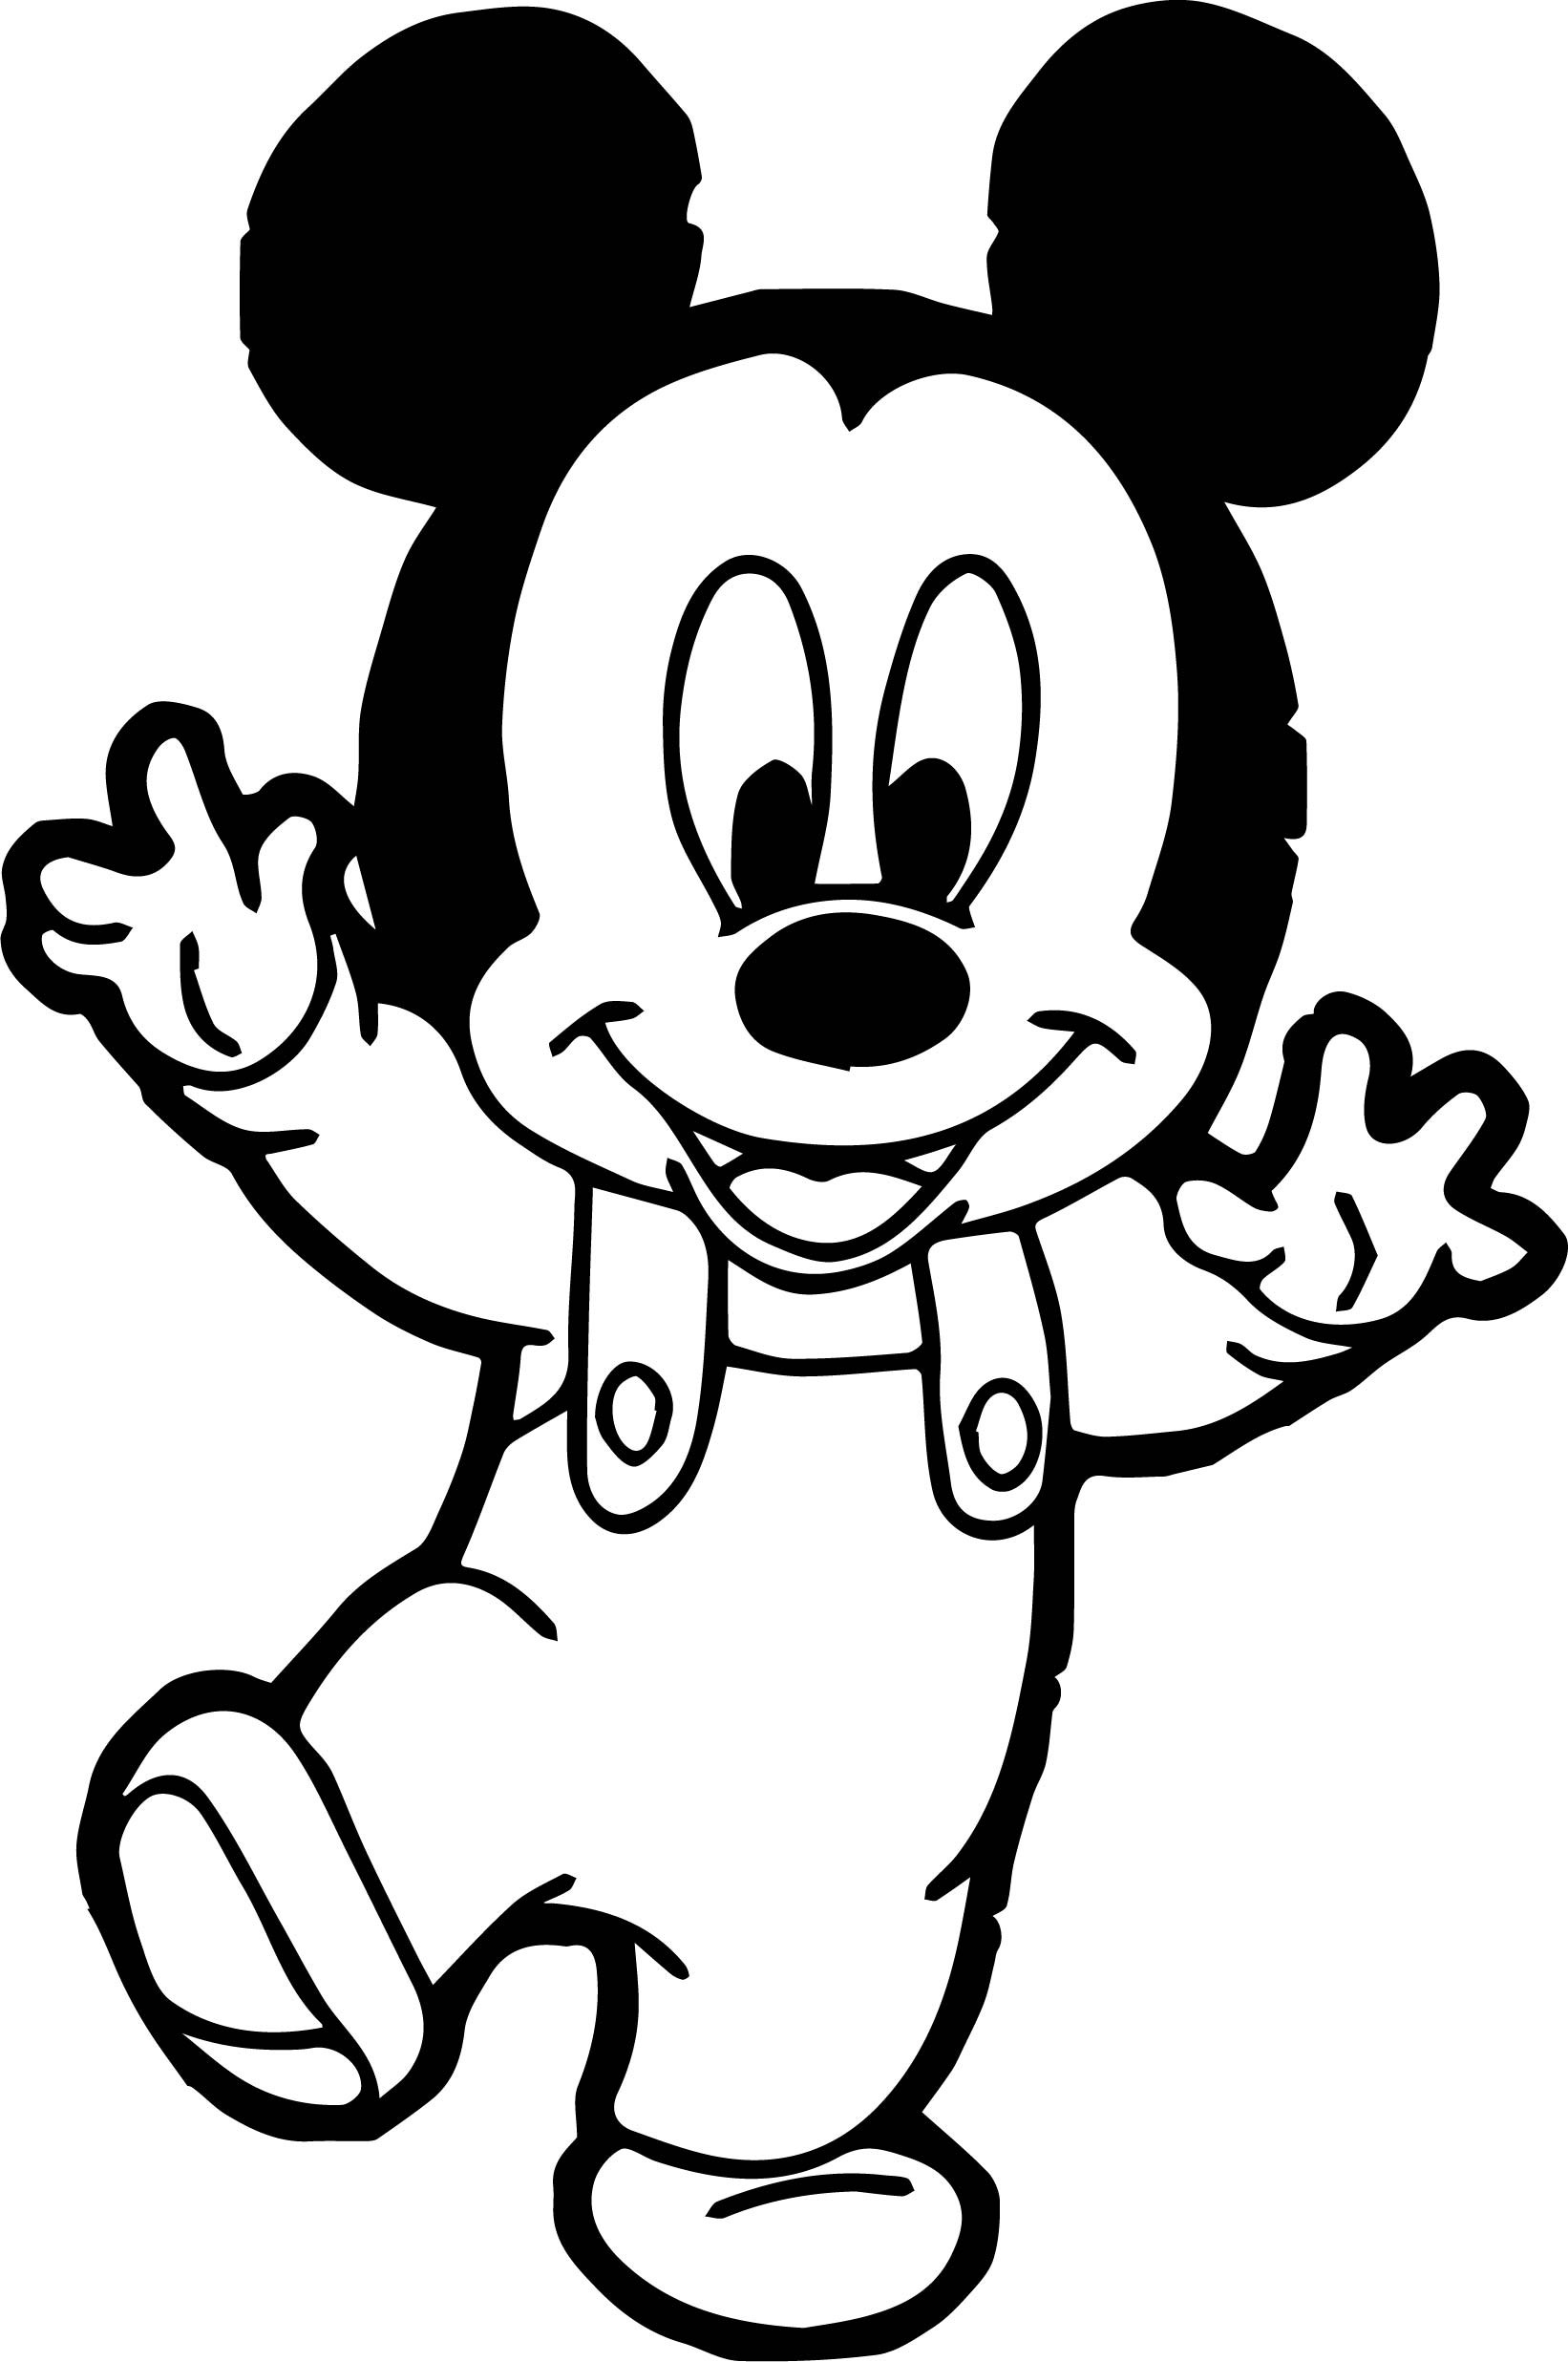 Baby Mickey Mouse Coloring Page
 Baby Mickey Walking Coloring Page